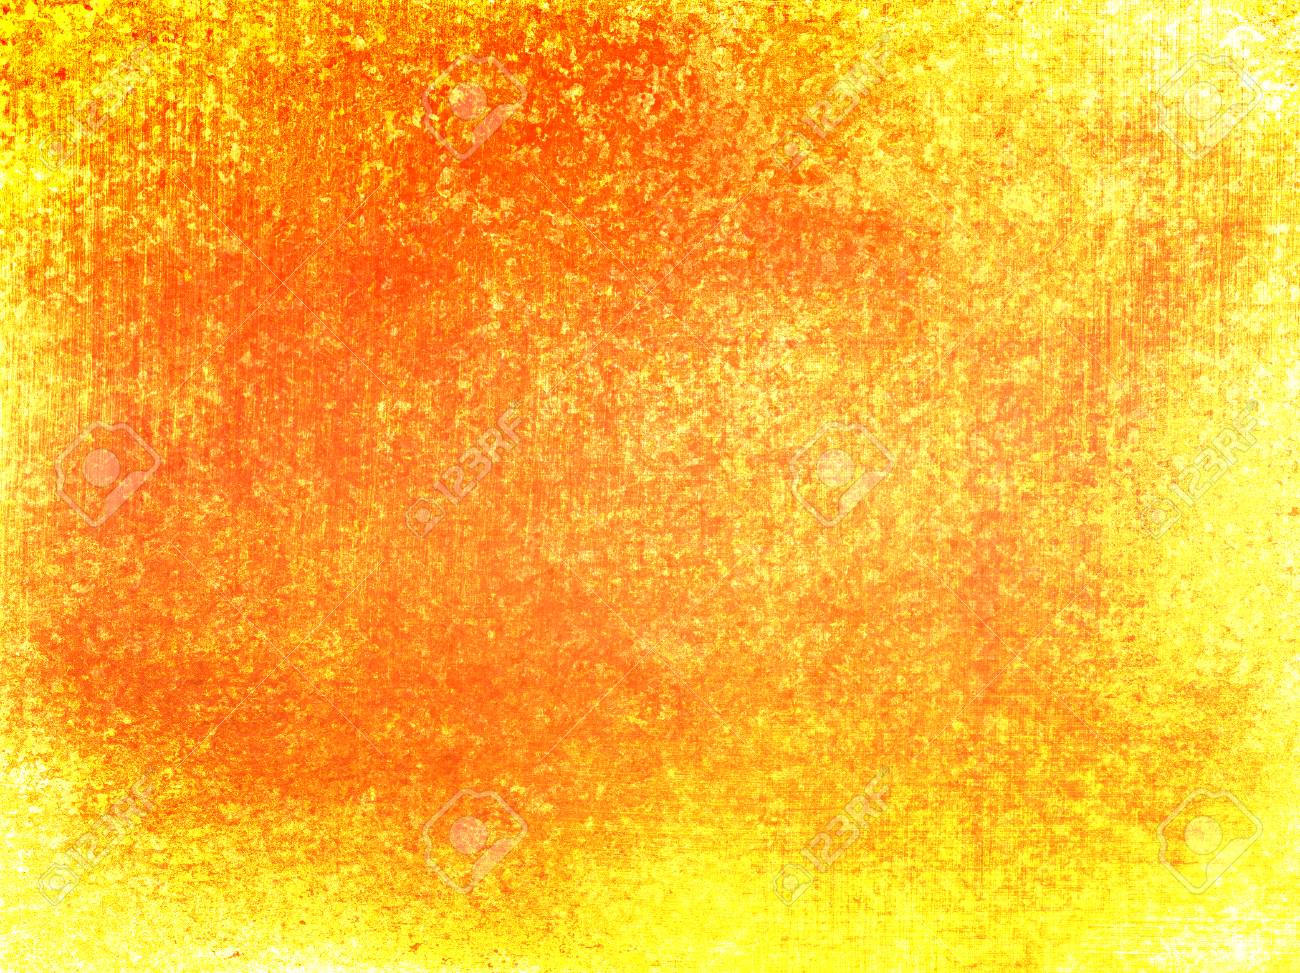 Orange Yellow Background Warm Autumn Or Fall Colors Rich